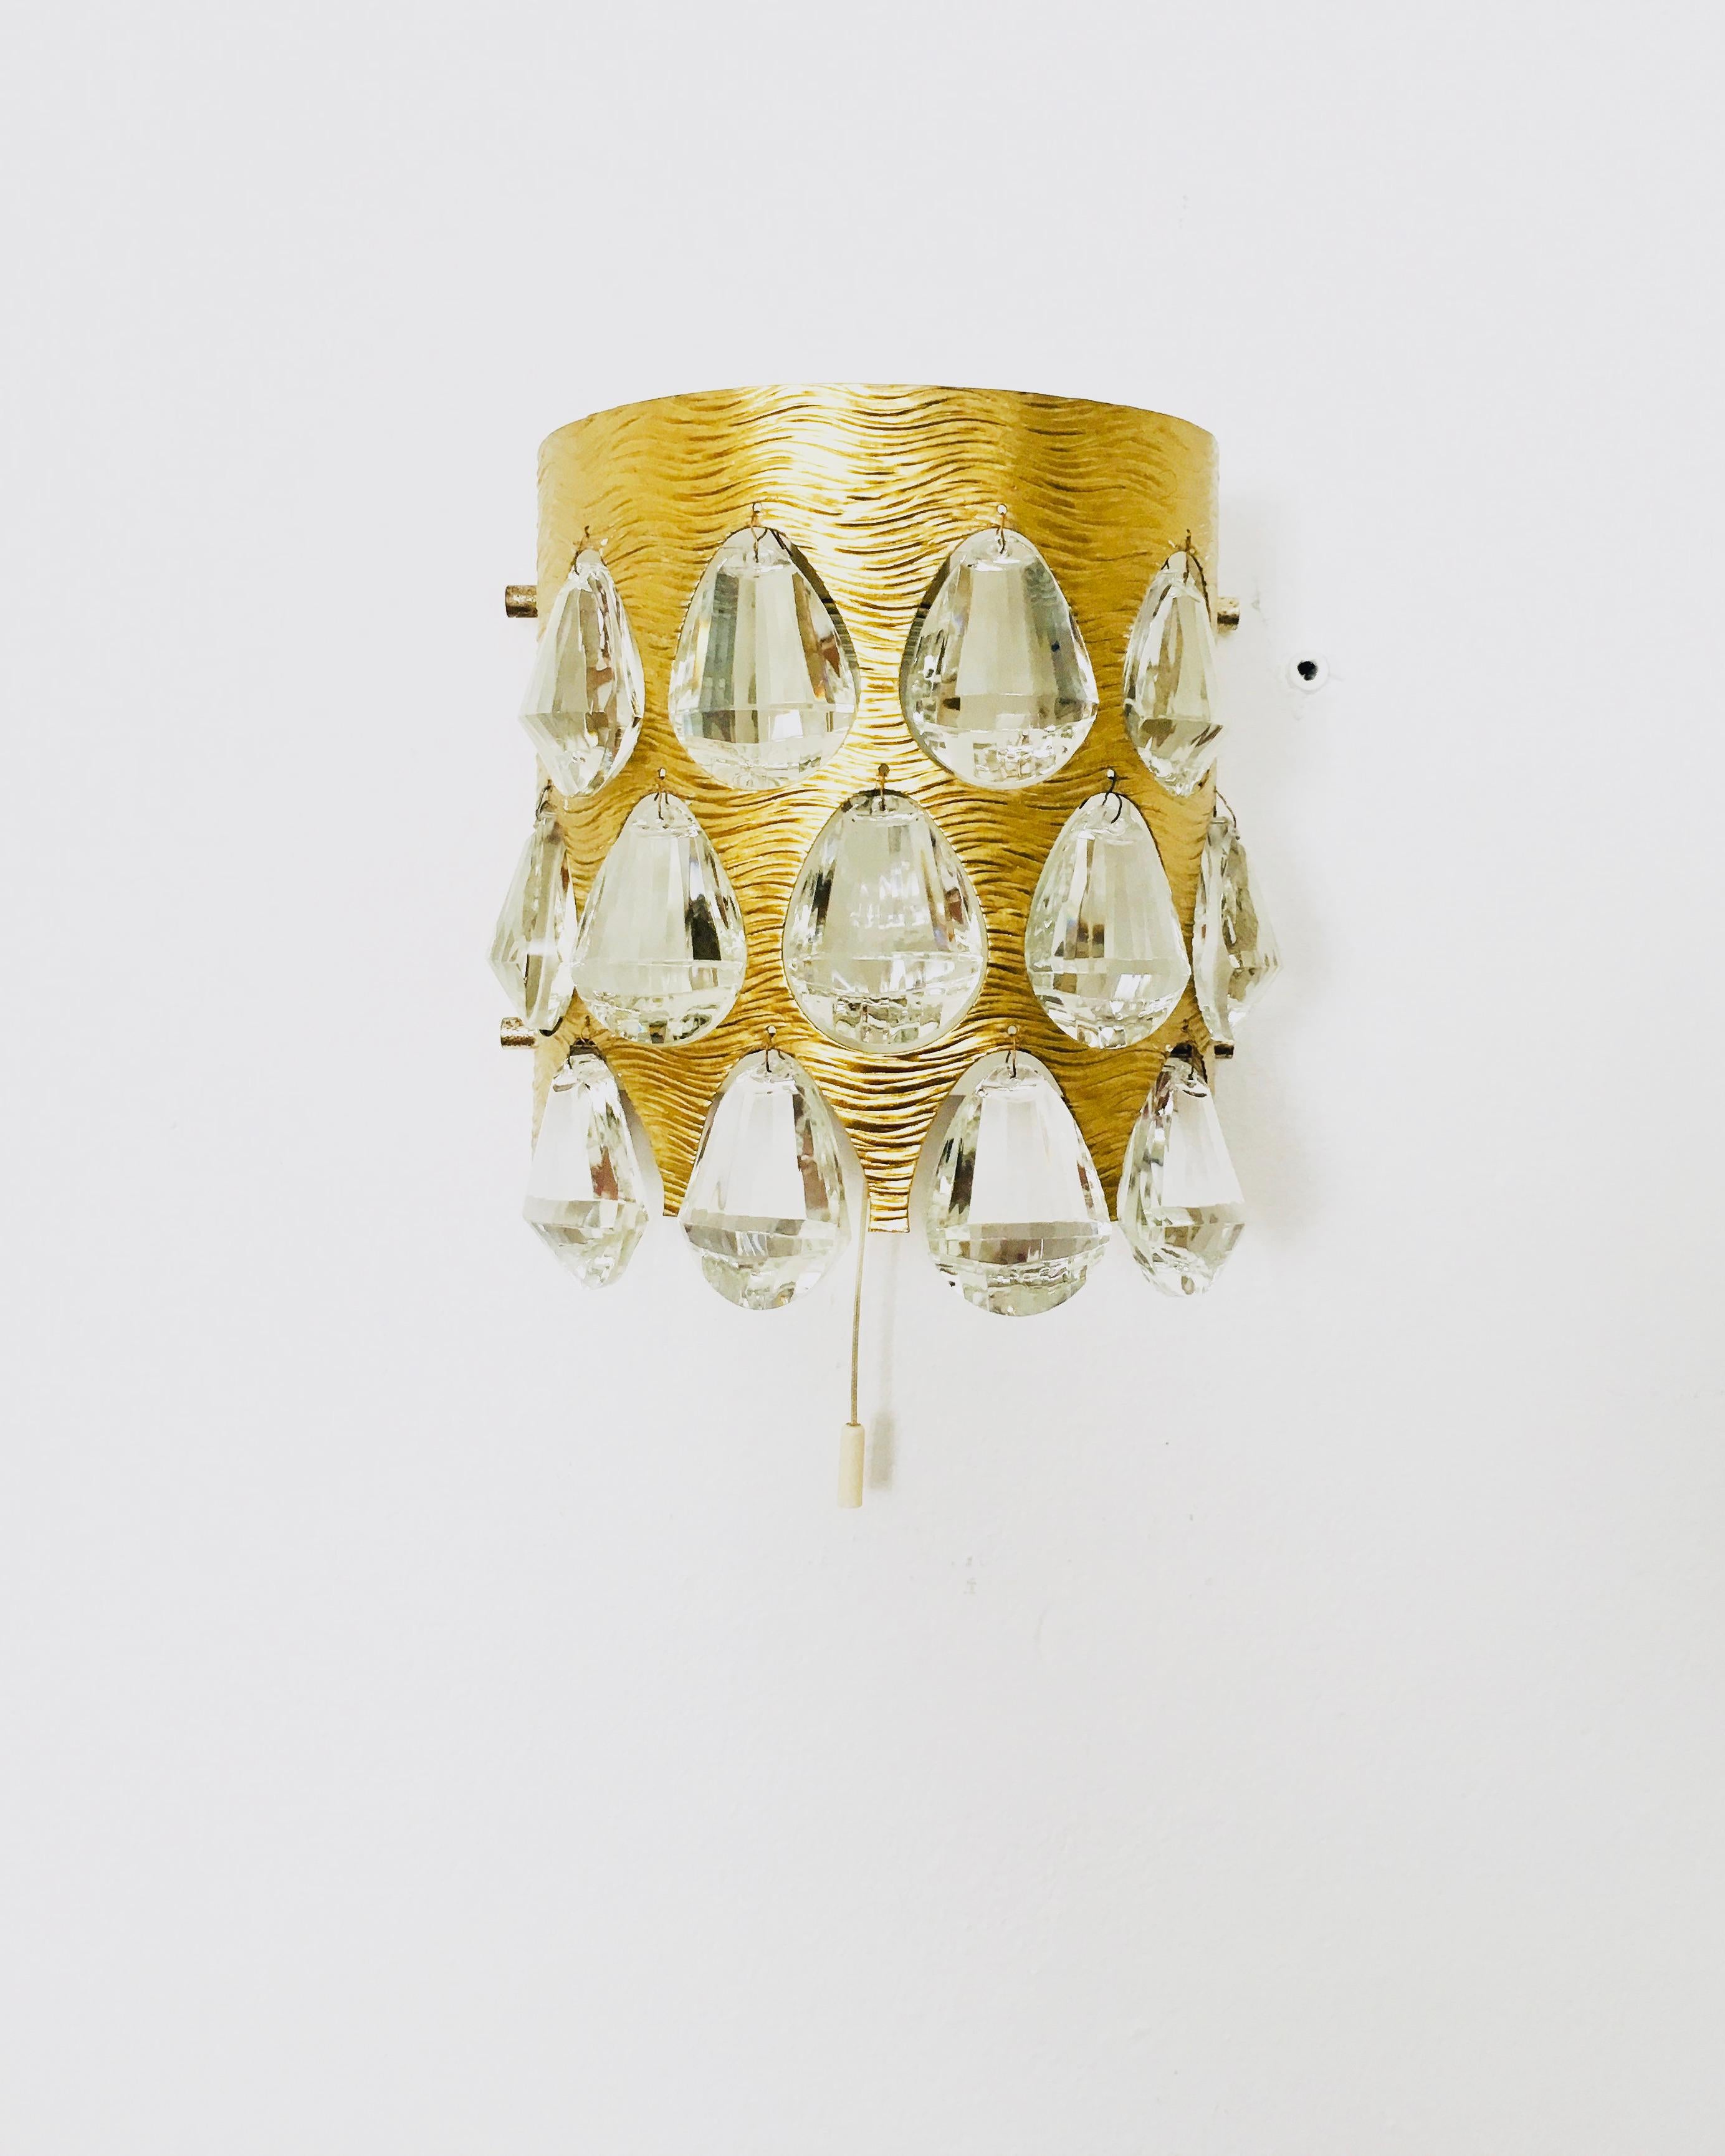 Very beautiful and rare wall lamps from the 1960s.
Very pleasant lighting effect due to the crystal glass, which spreads an elegant, sparkling play of light in the room.

Manufacturer: Palwa

Condition:

Very good vintage condition with